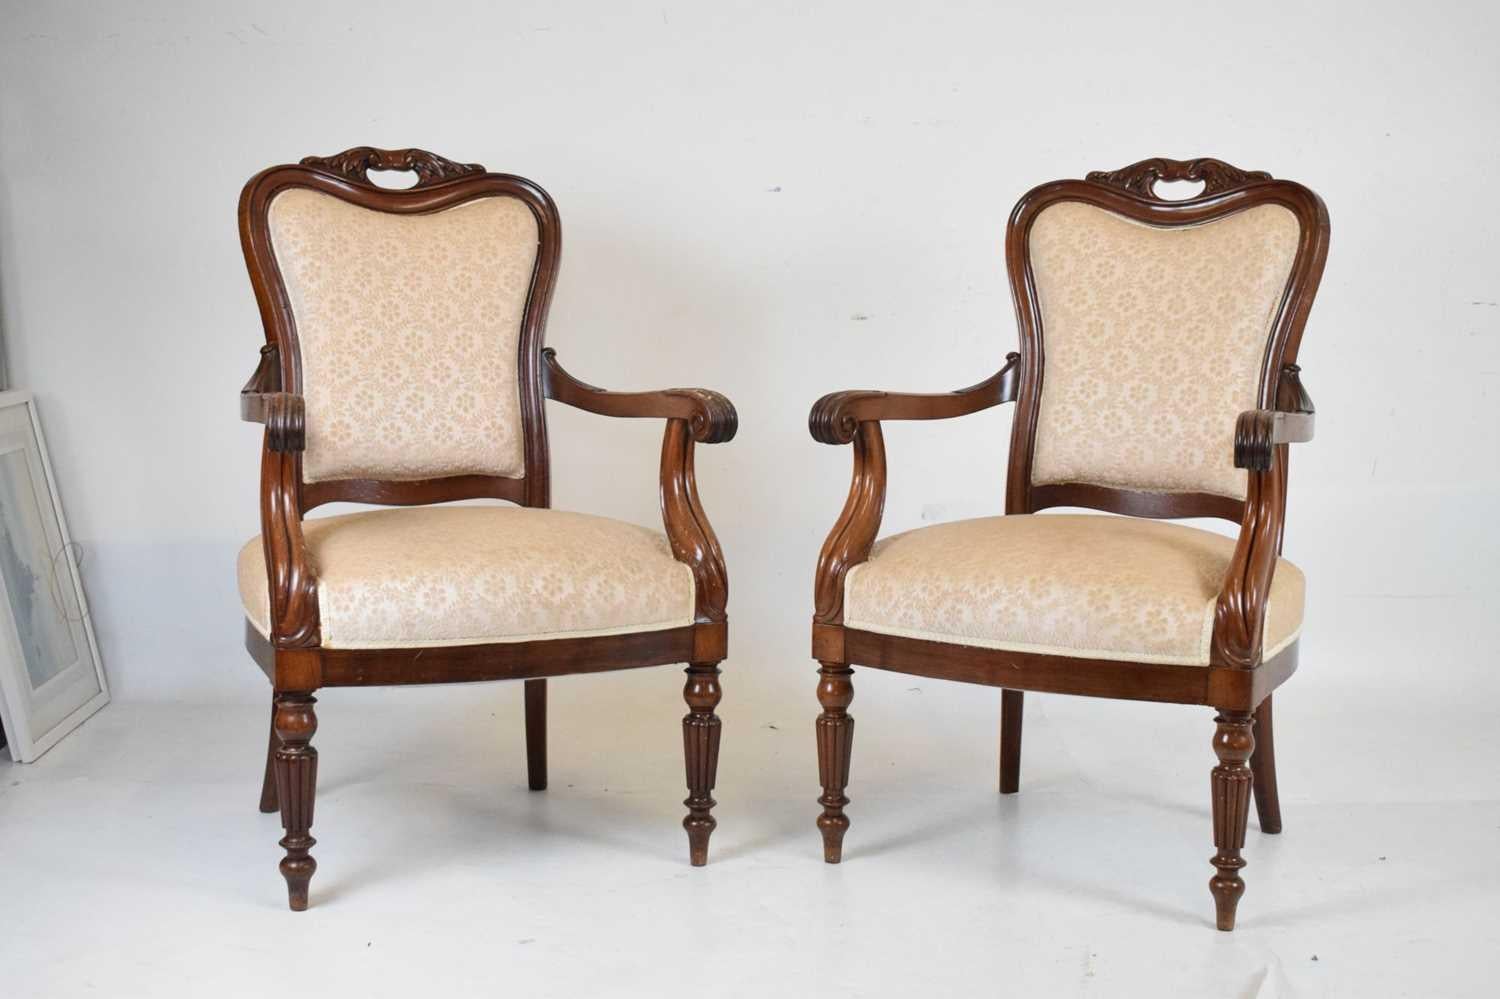 An elegant matching pair of mahogany open armchairs, scrolling shaped arms, on fluted turned supports, re-upholstered in cream damask fabric.
The open armchair and the fluted leg was modelled after ancient Greek columns, and it flourished in the